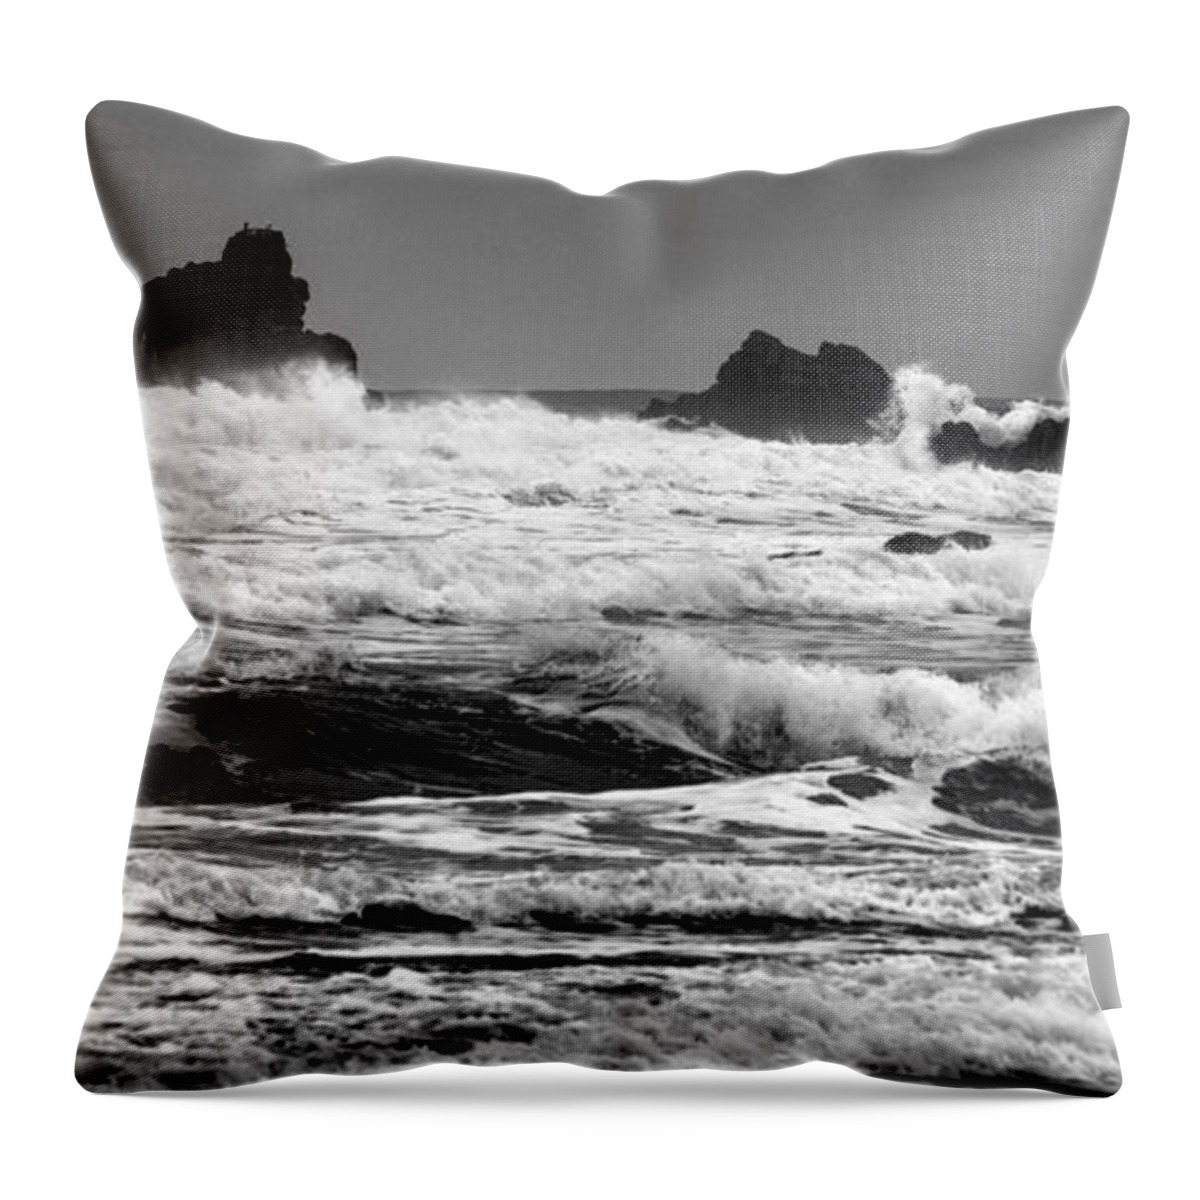 Sea Throw Pillow featuring the photograph Sea Stacks by Nigel R Bell